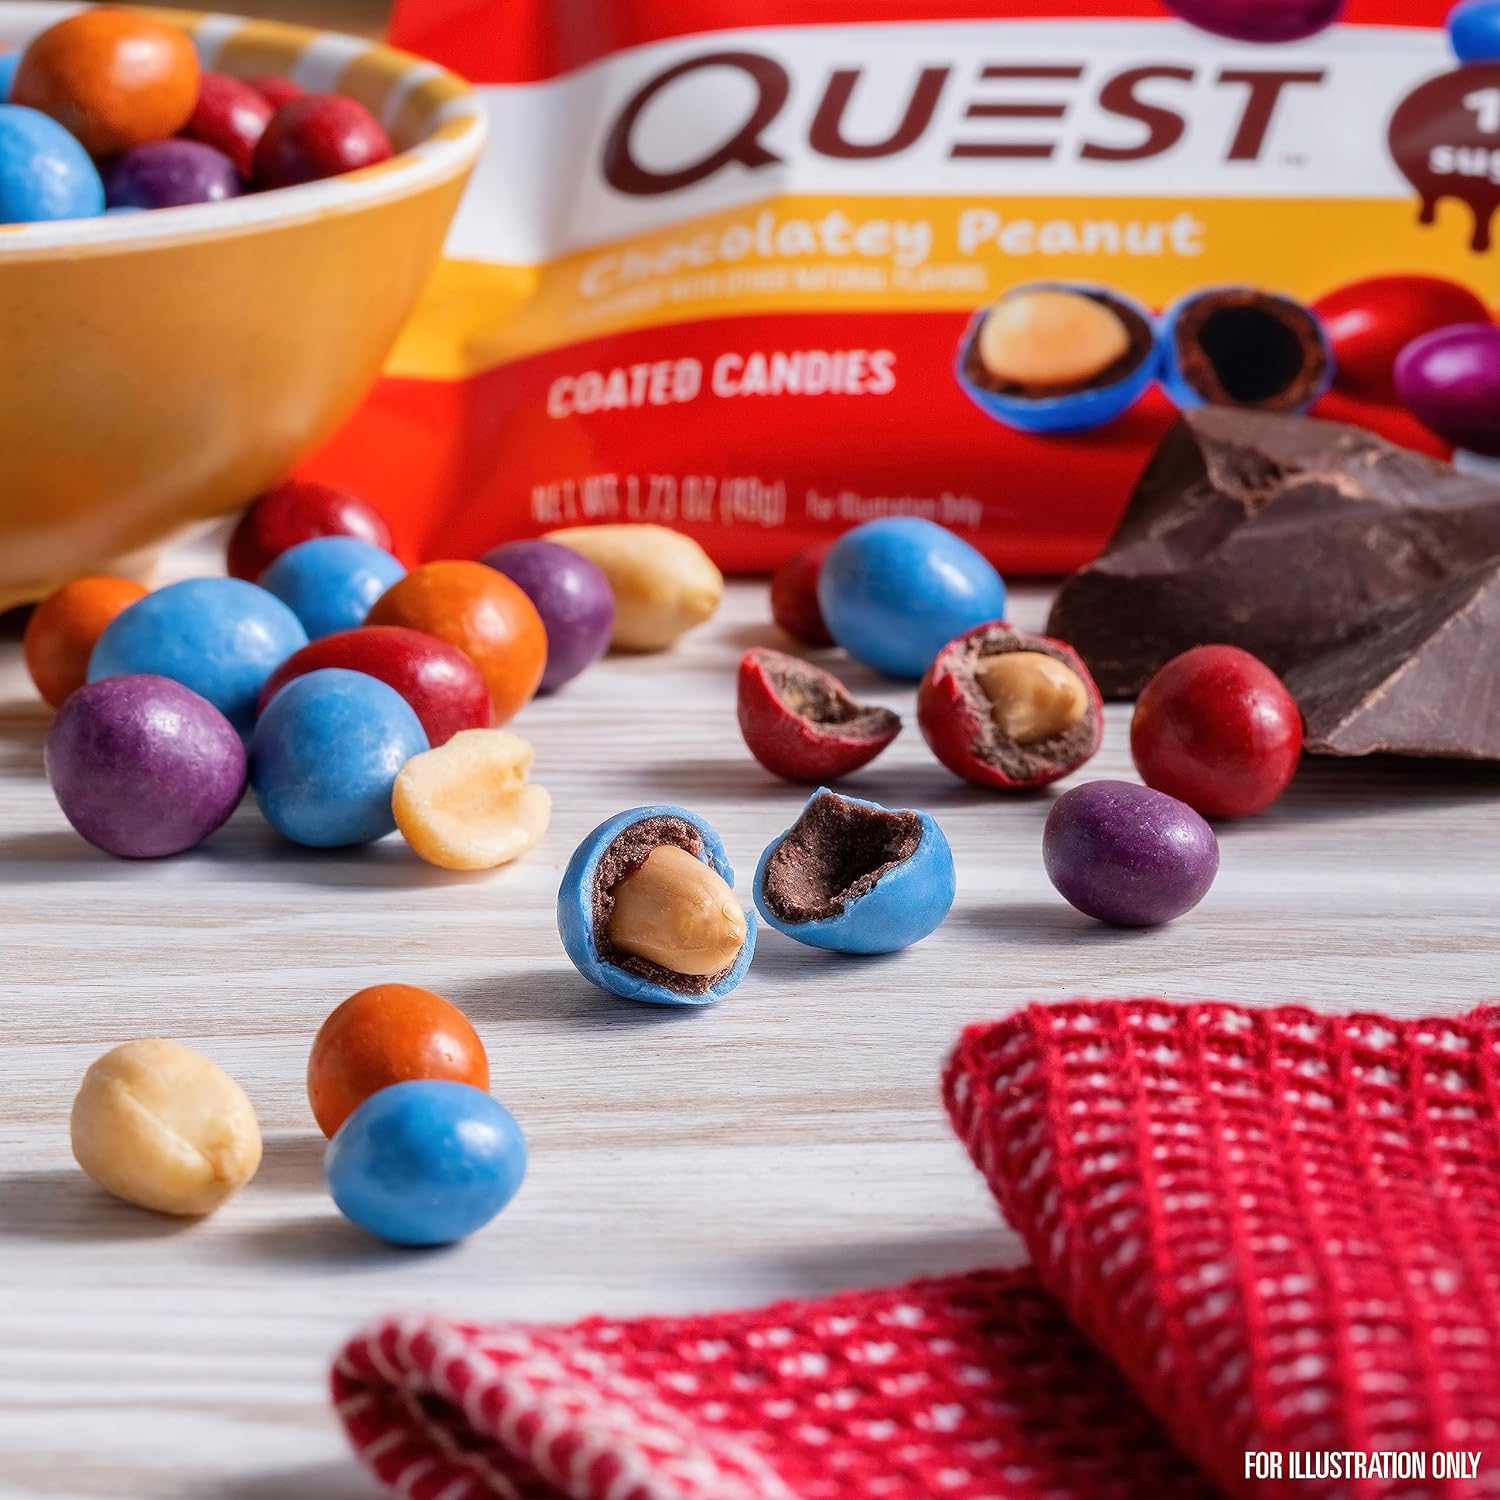 Quest Nutrition Coated Candies 1 pack Quest Nutrition Top Nutrition Canada